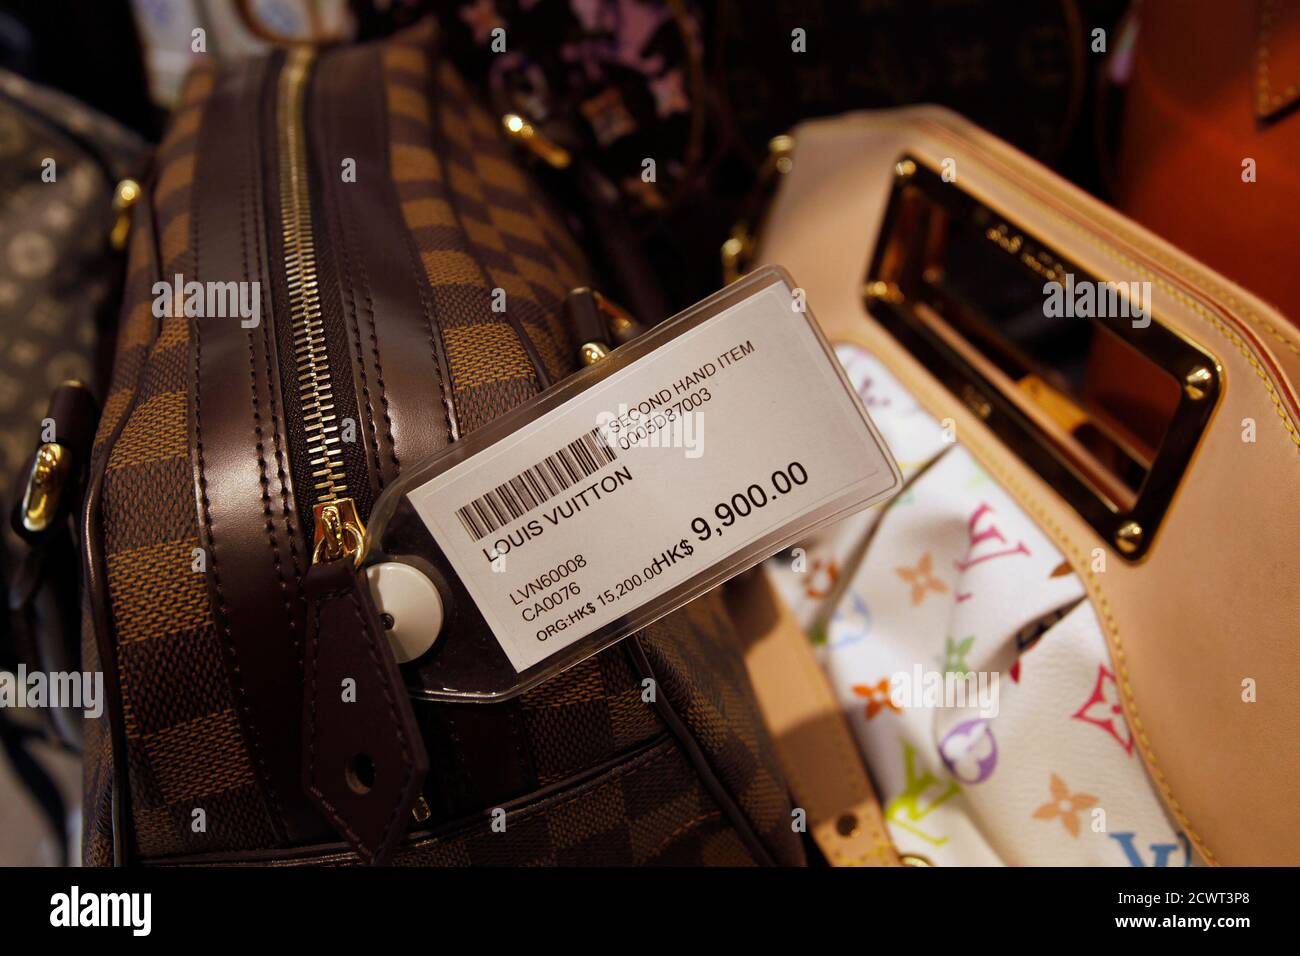 A second-hand handbag is displayed with a price-tag of HK$9,900 from its original price of HK$15,200 (US$1,949) at a Milan Station outlet in Hong Kong September 2, 2013. In